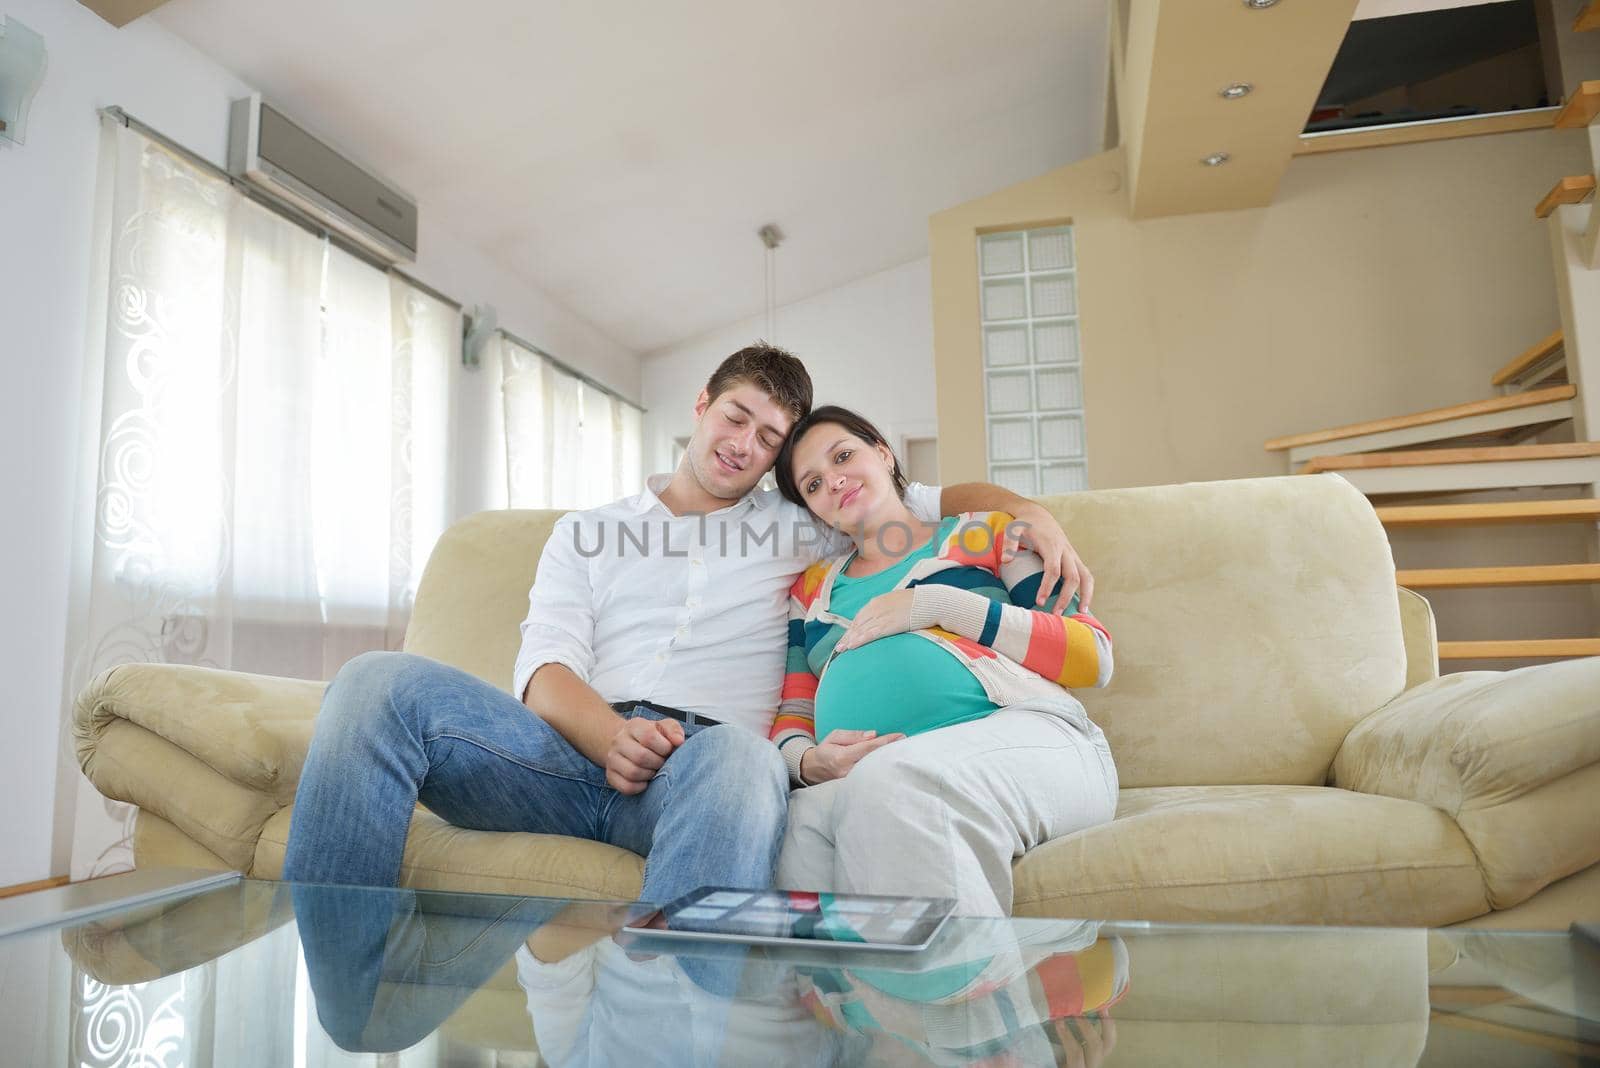 pregnant woman with her husband have fun relax and using tablet comture at modern home